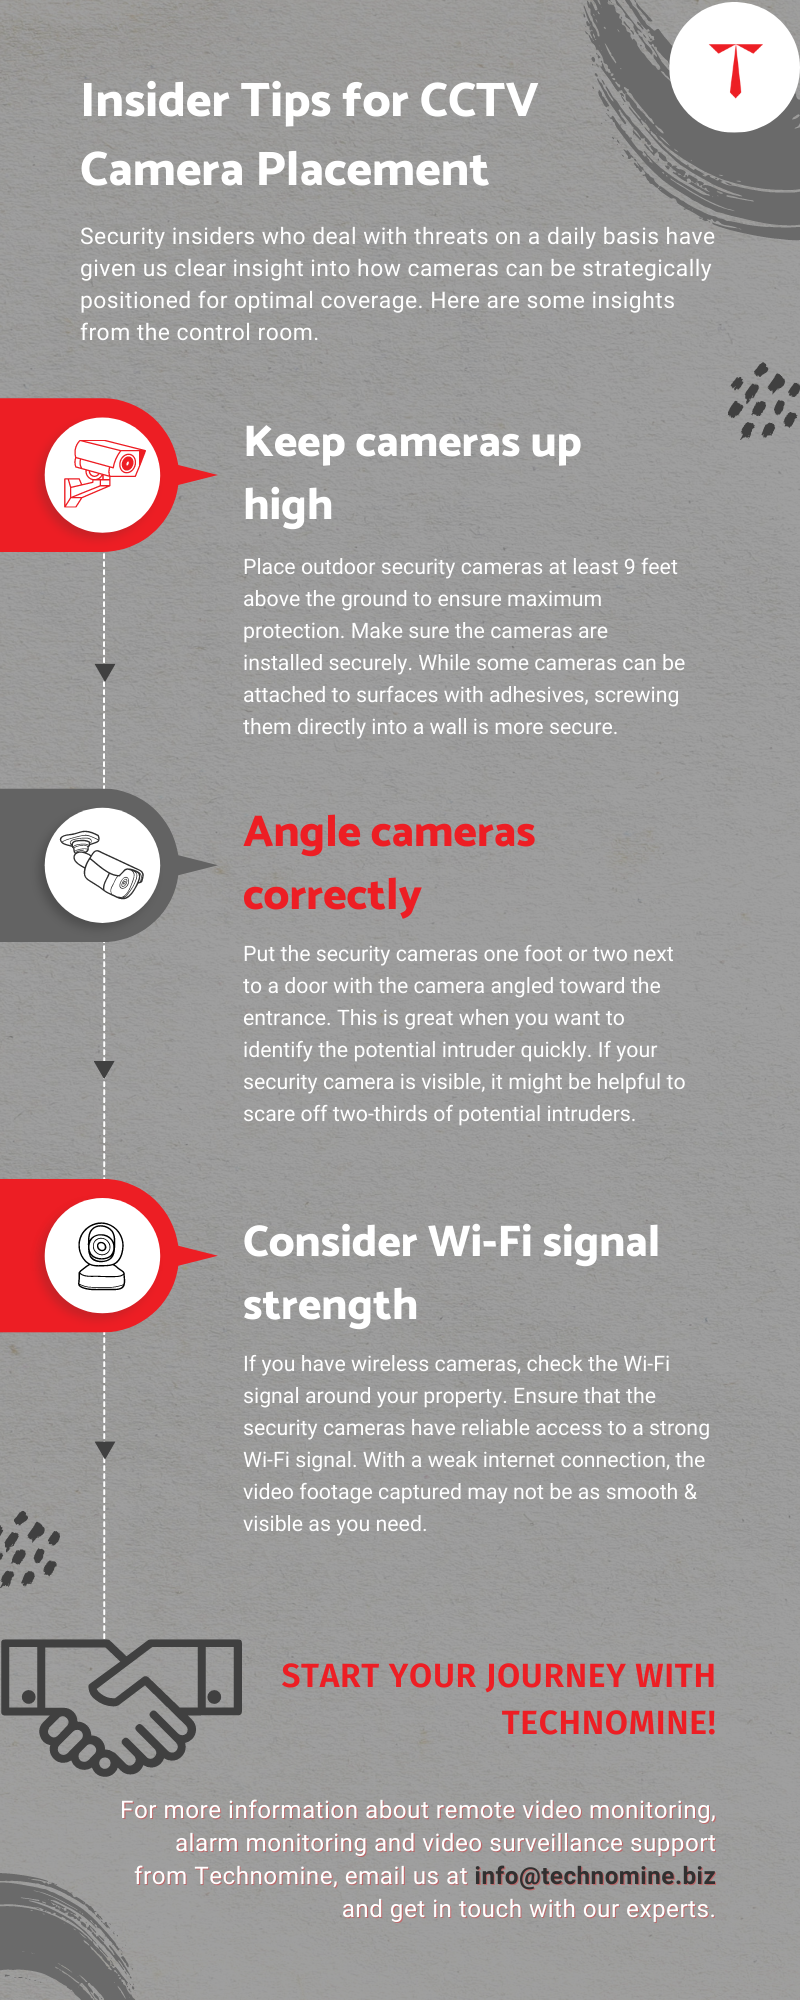 Insider Tips for CCTV Camera Placement Infographic